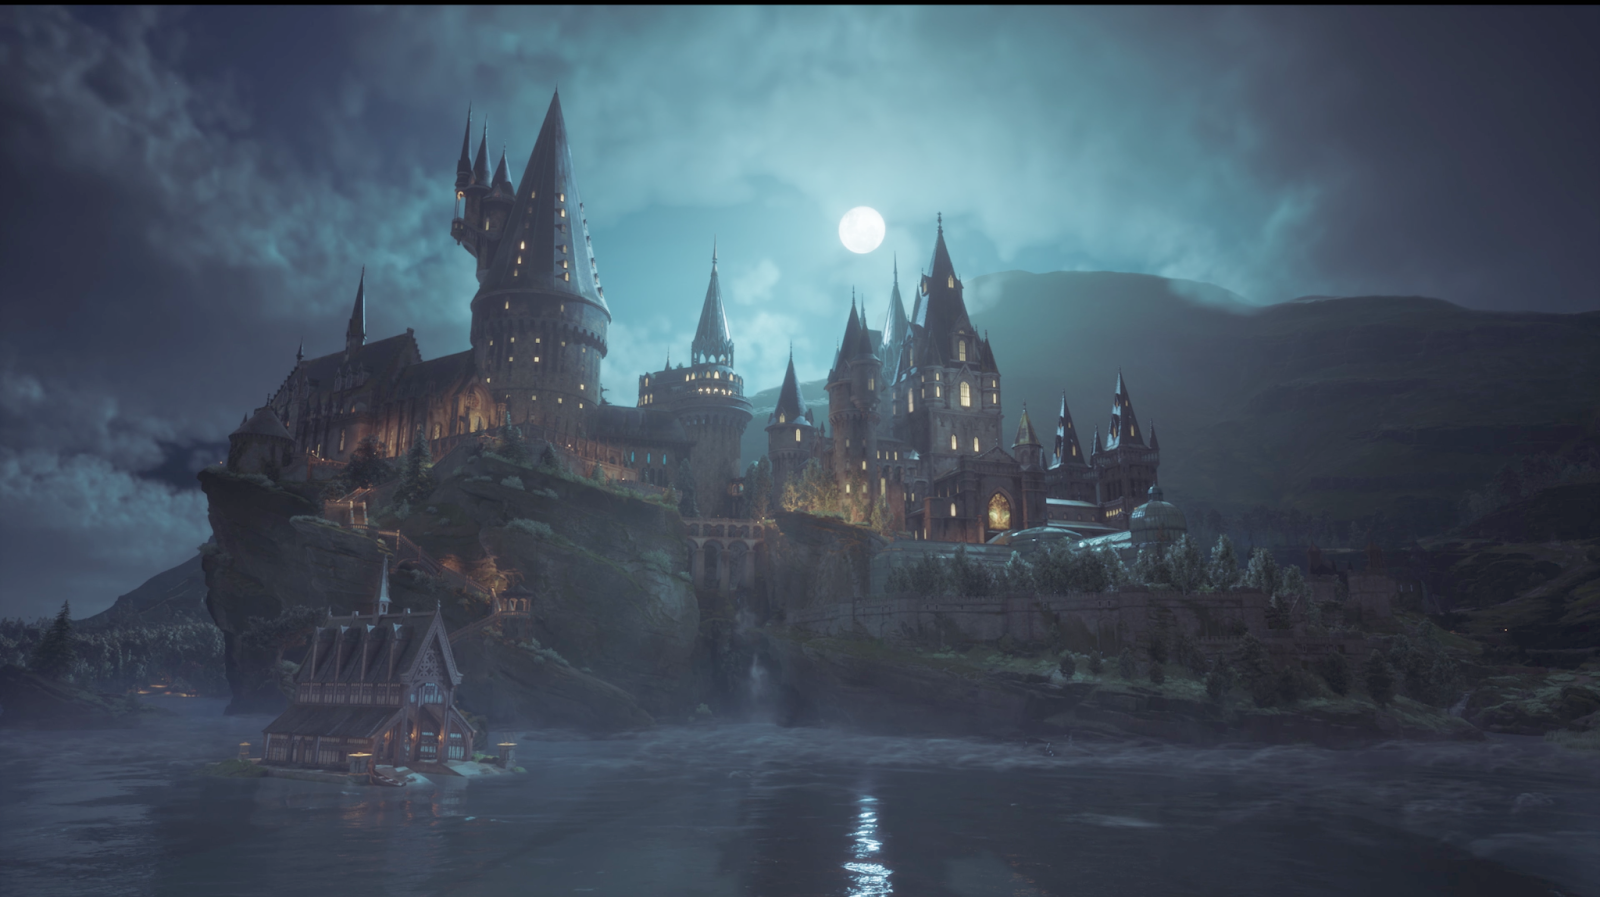 First View of Hogwarts castle in HOGWARTS LEGACY